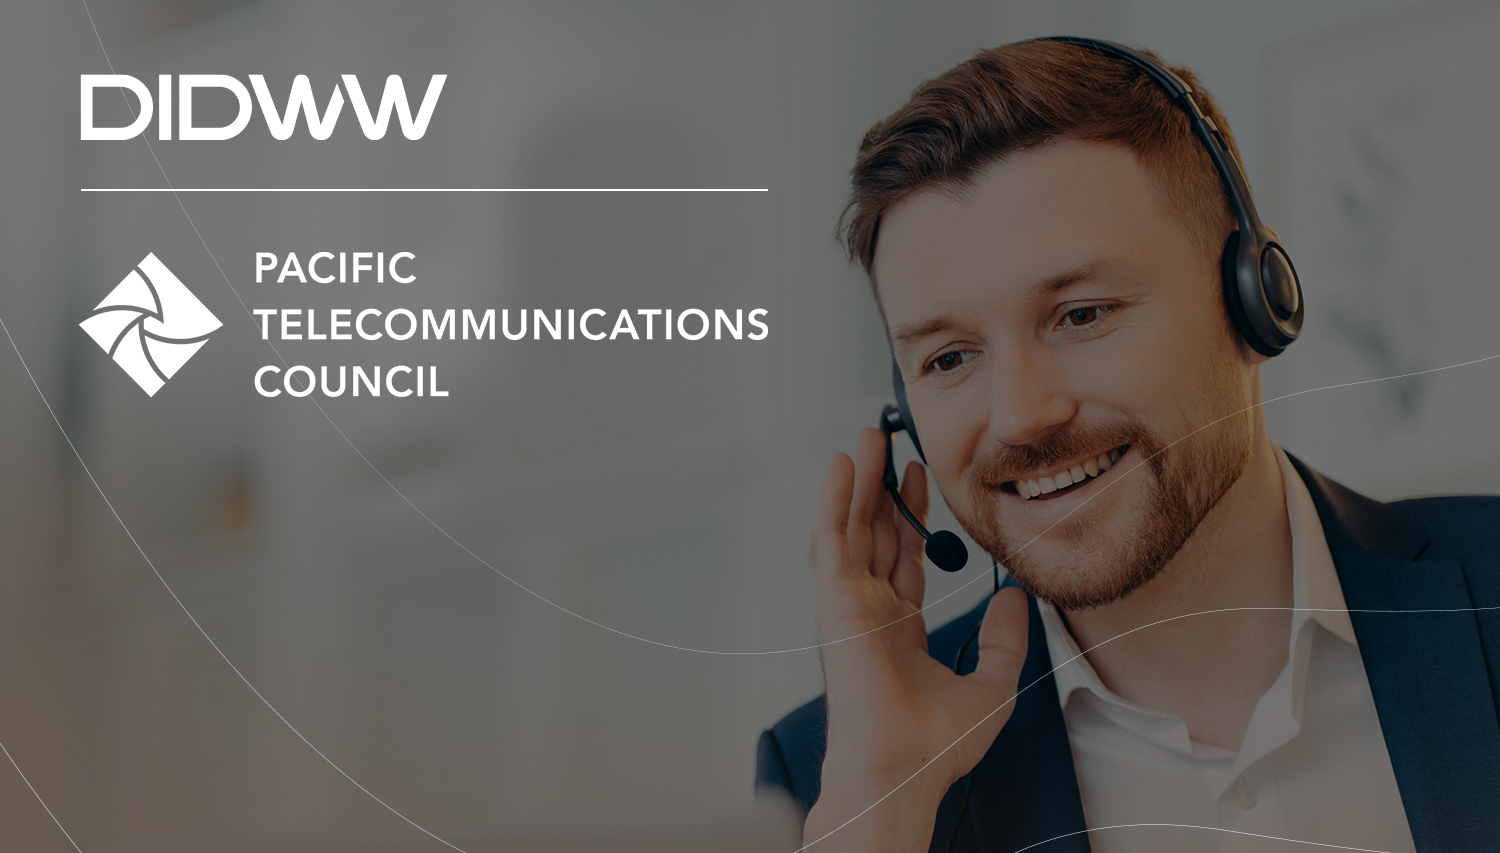 DIDWW, a telecom operator delivering SIP trunking and SMS services for businesses and telco carriers, has secured their membership of PTC.